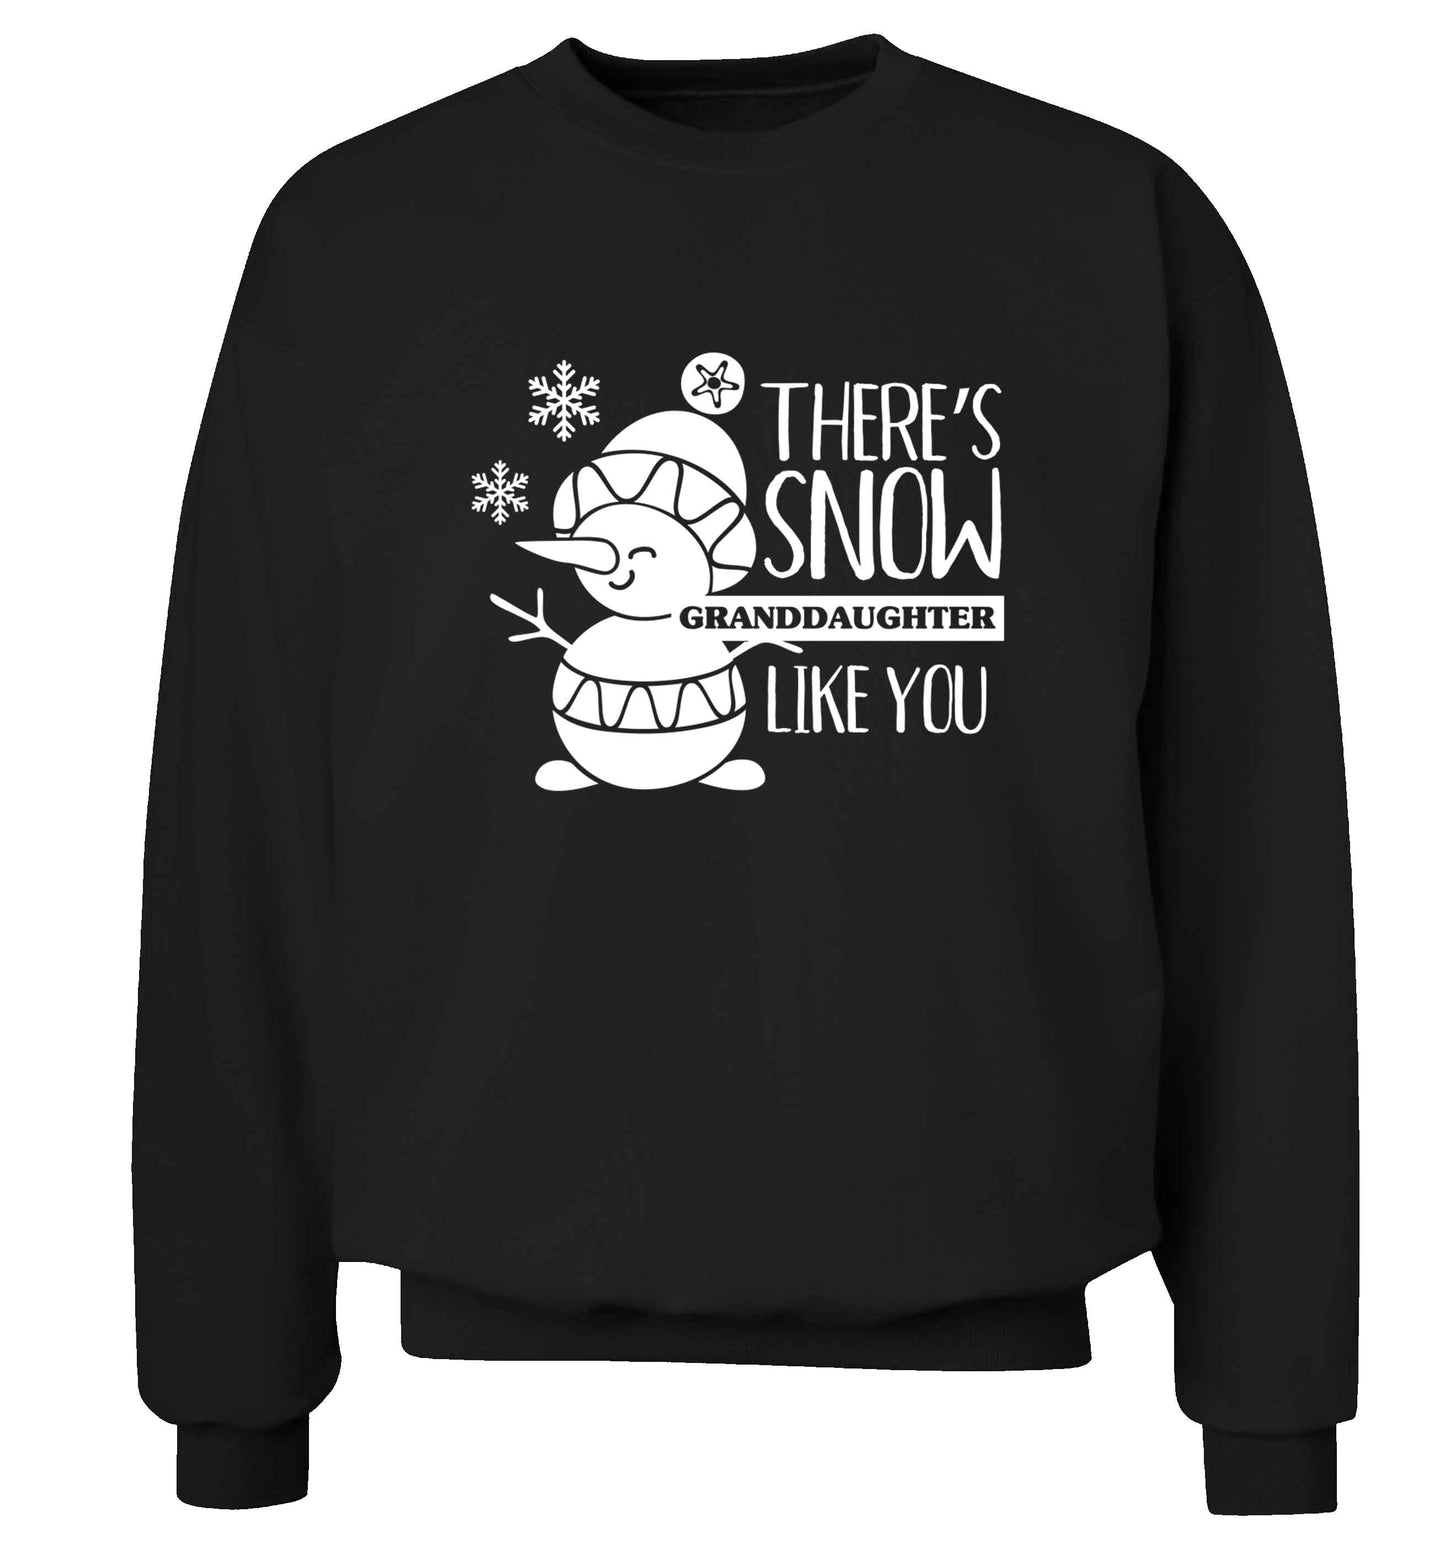 There's snow granddaughter like you adult's unisex black sweater 2XL